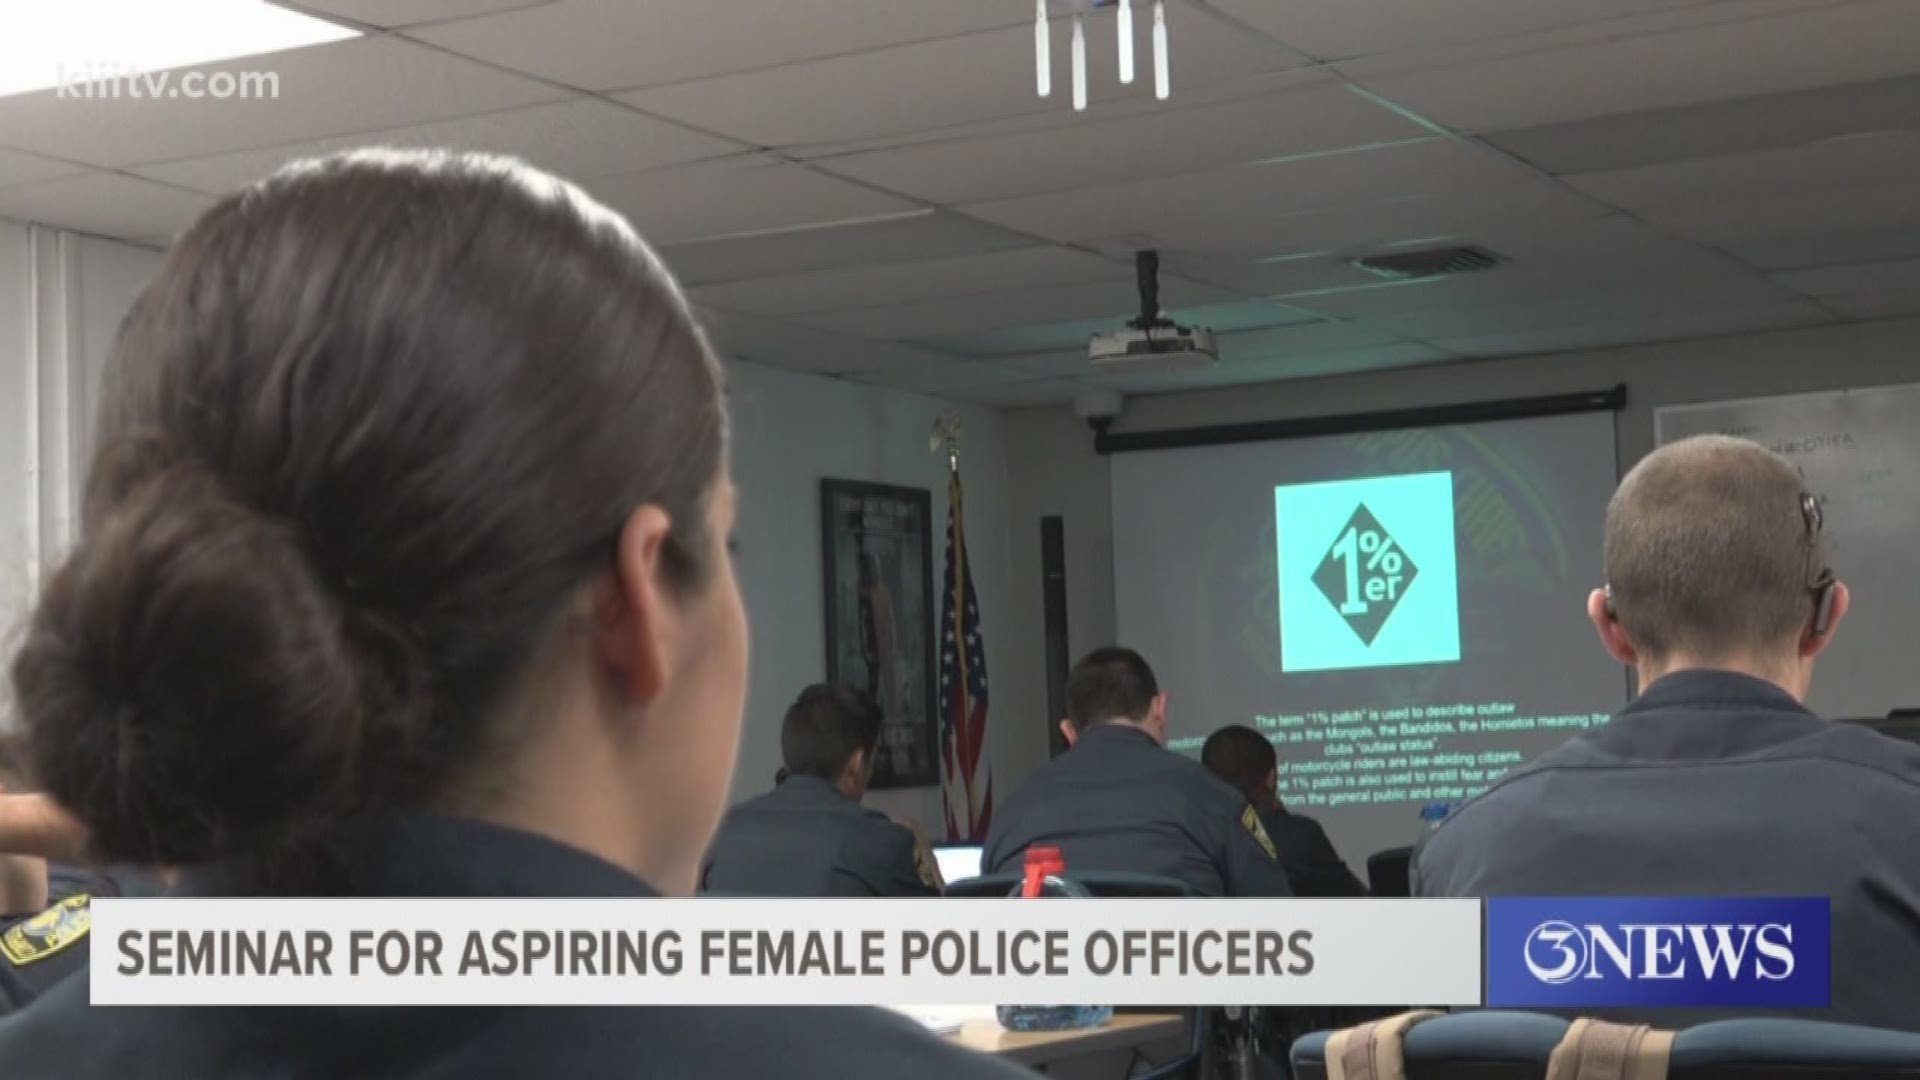 The event is designed to help aspiring women who want a future in law enforcement as police officers.